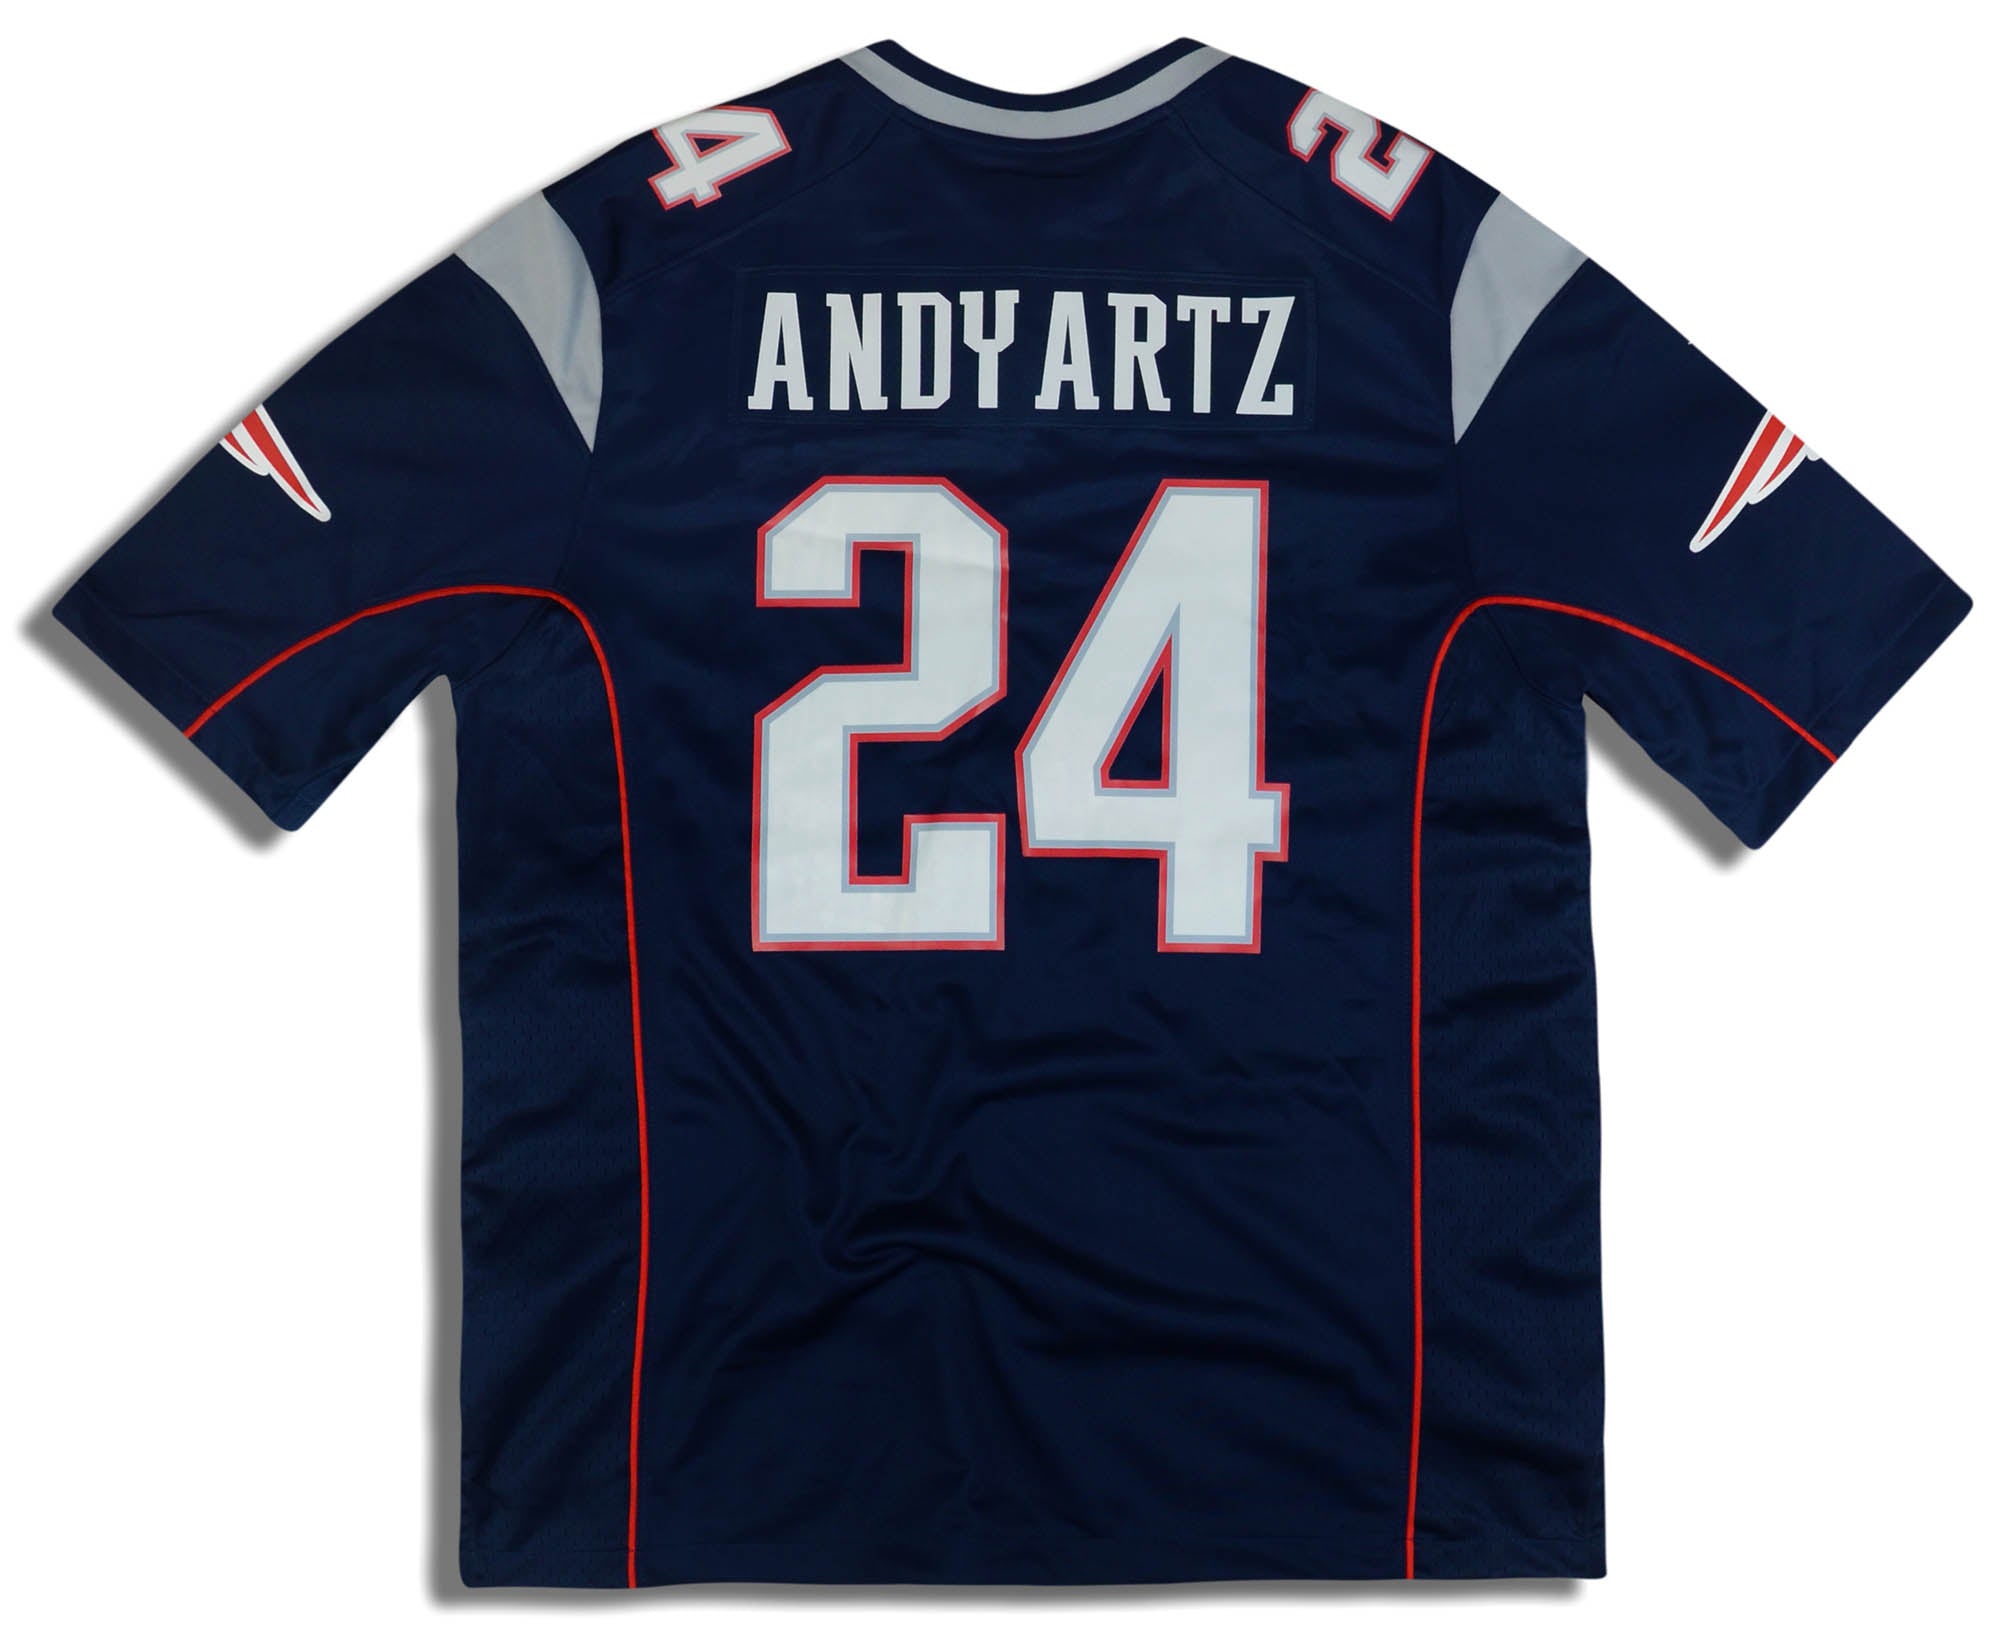 2018-19 NEW ENGLAND PATRIOTS ANDY ARTZ #24 NIKE GAME JERSEY (HOME) L - W/TAGS